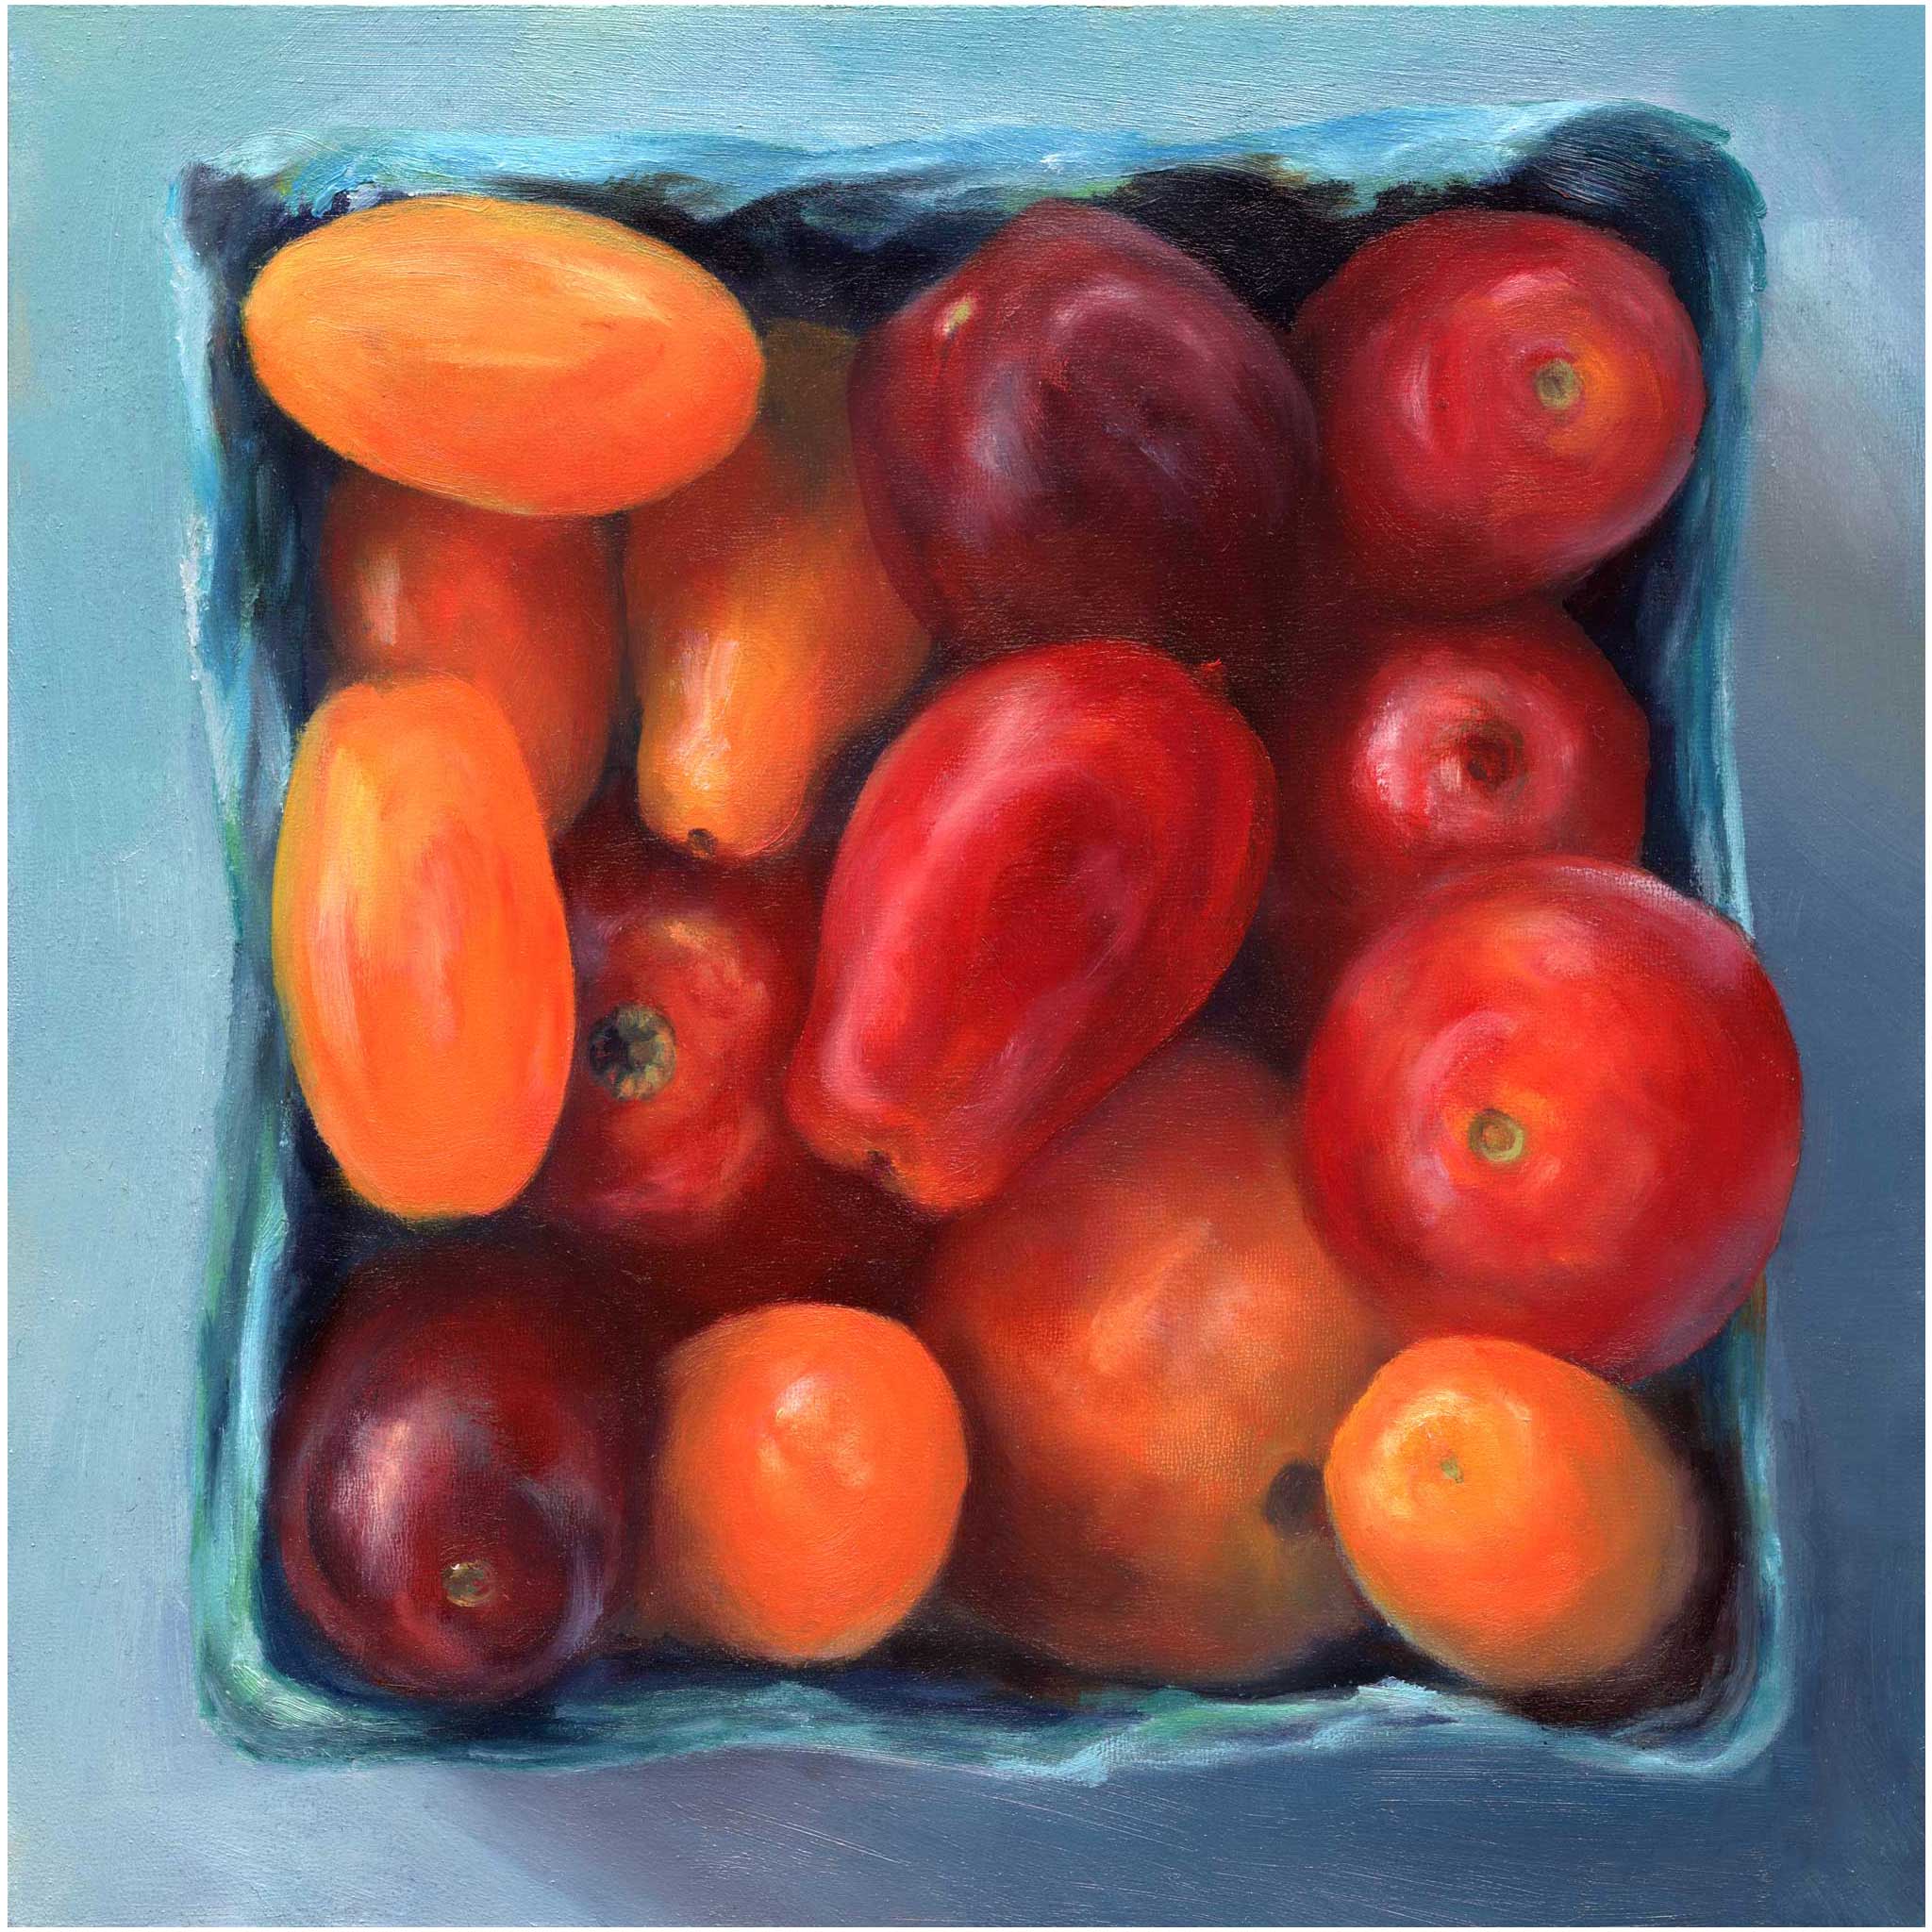 red, orange and yellow heirloom cherry tomatoes in a blue geen farmers market box. This is an art print of a vegetable still life oilpainting by Jo Bradney